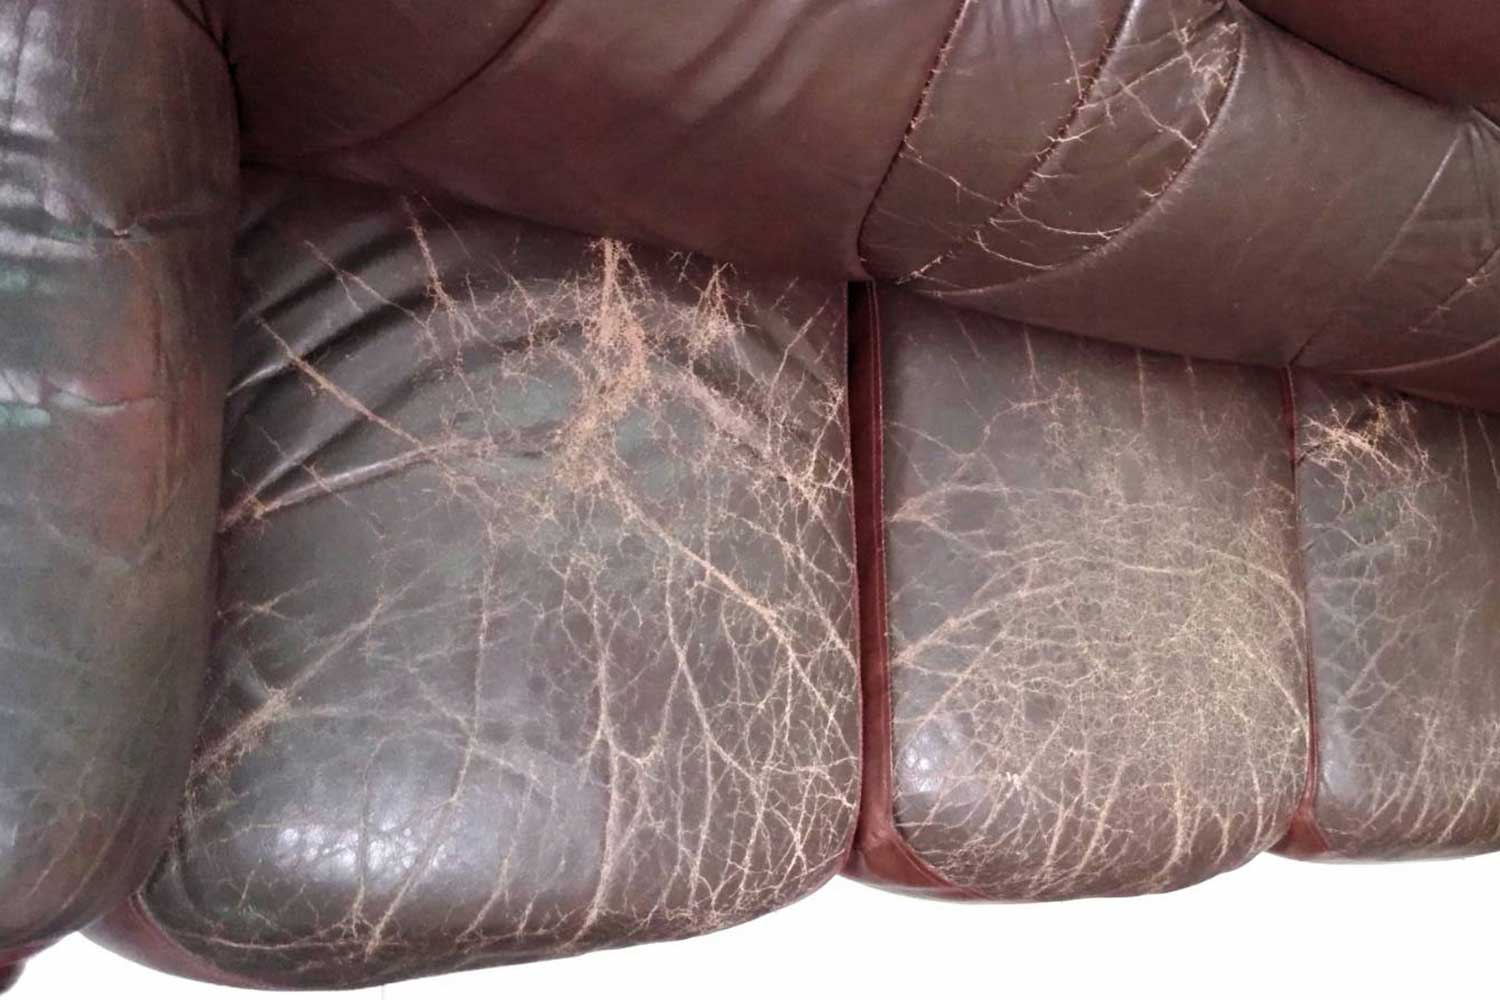 https://leather-pro.com/wp-content/uploads/2018/05/news_red_furniture_before_1500.jpg